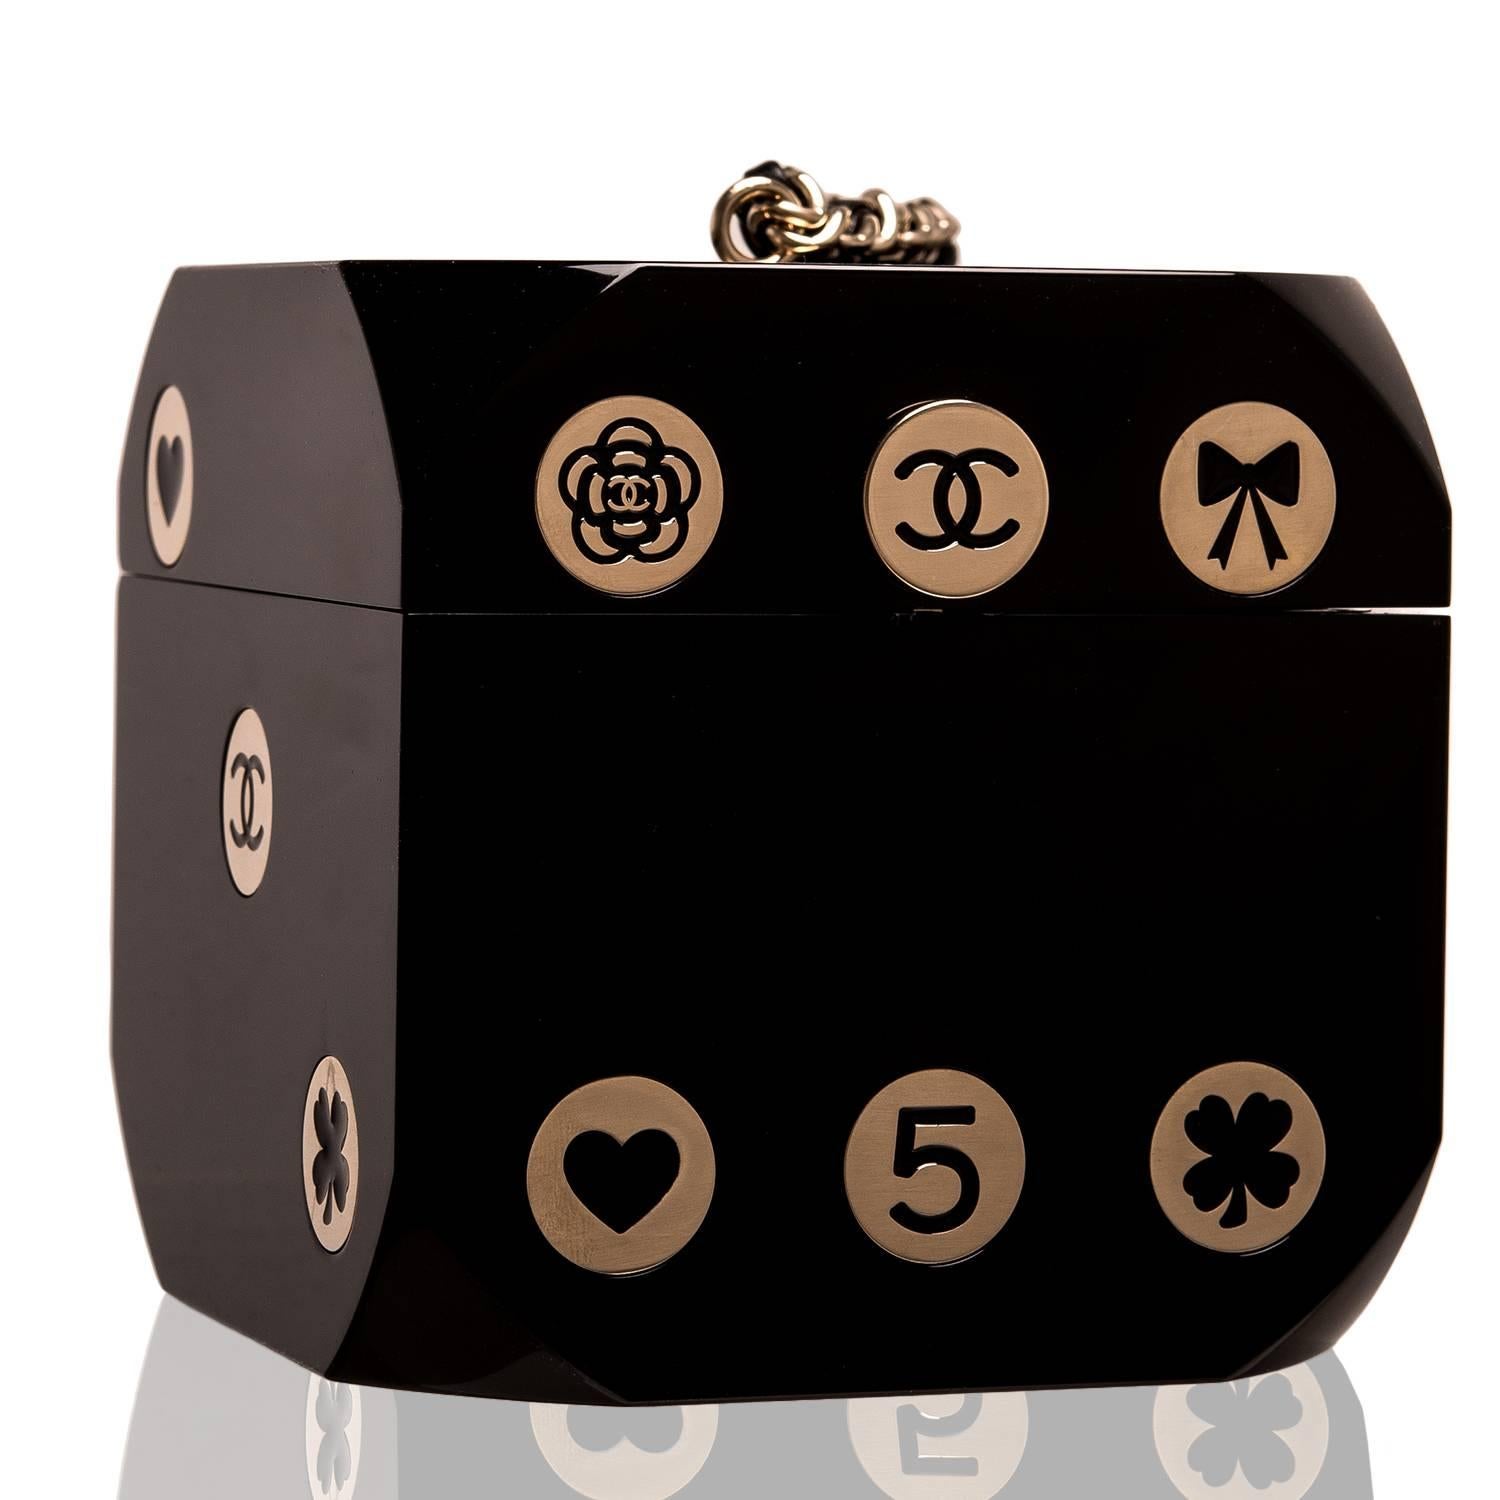 Chanel limited edition, runway Casino Dice minaudiere of black PVC with brass hardware.

This rare, collectible clutch shaped like a single die features lucky club and heart symbols, Chanel icon No. 5, CC logo and camellia charms in brass in a